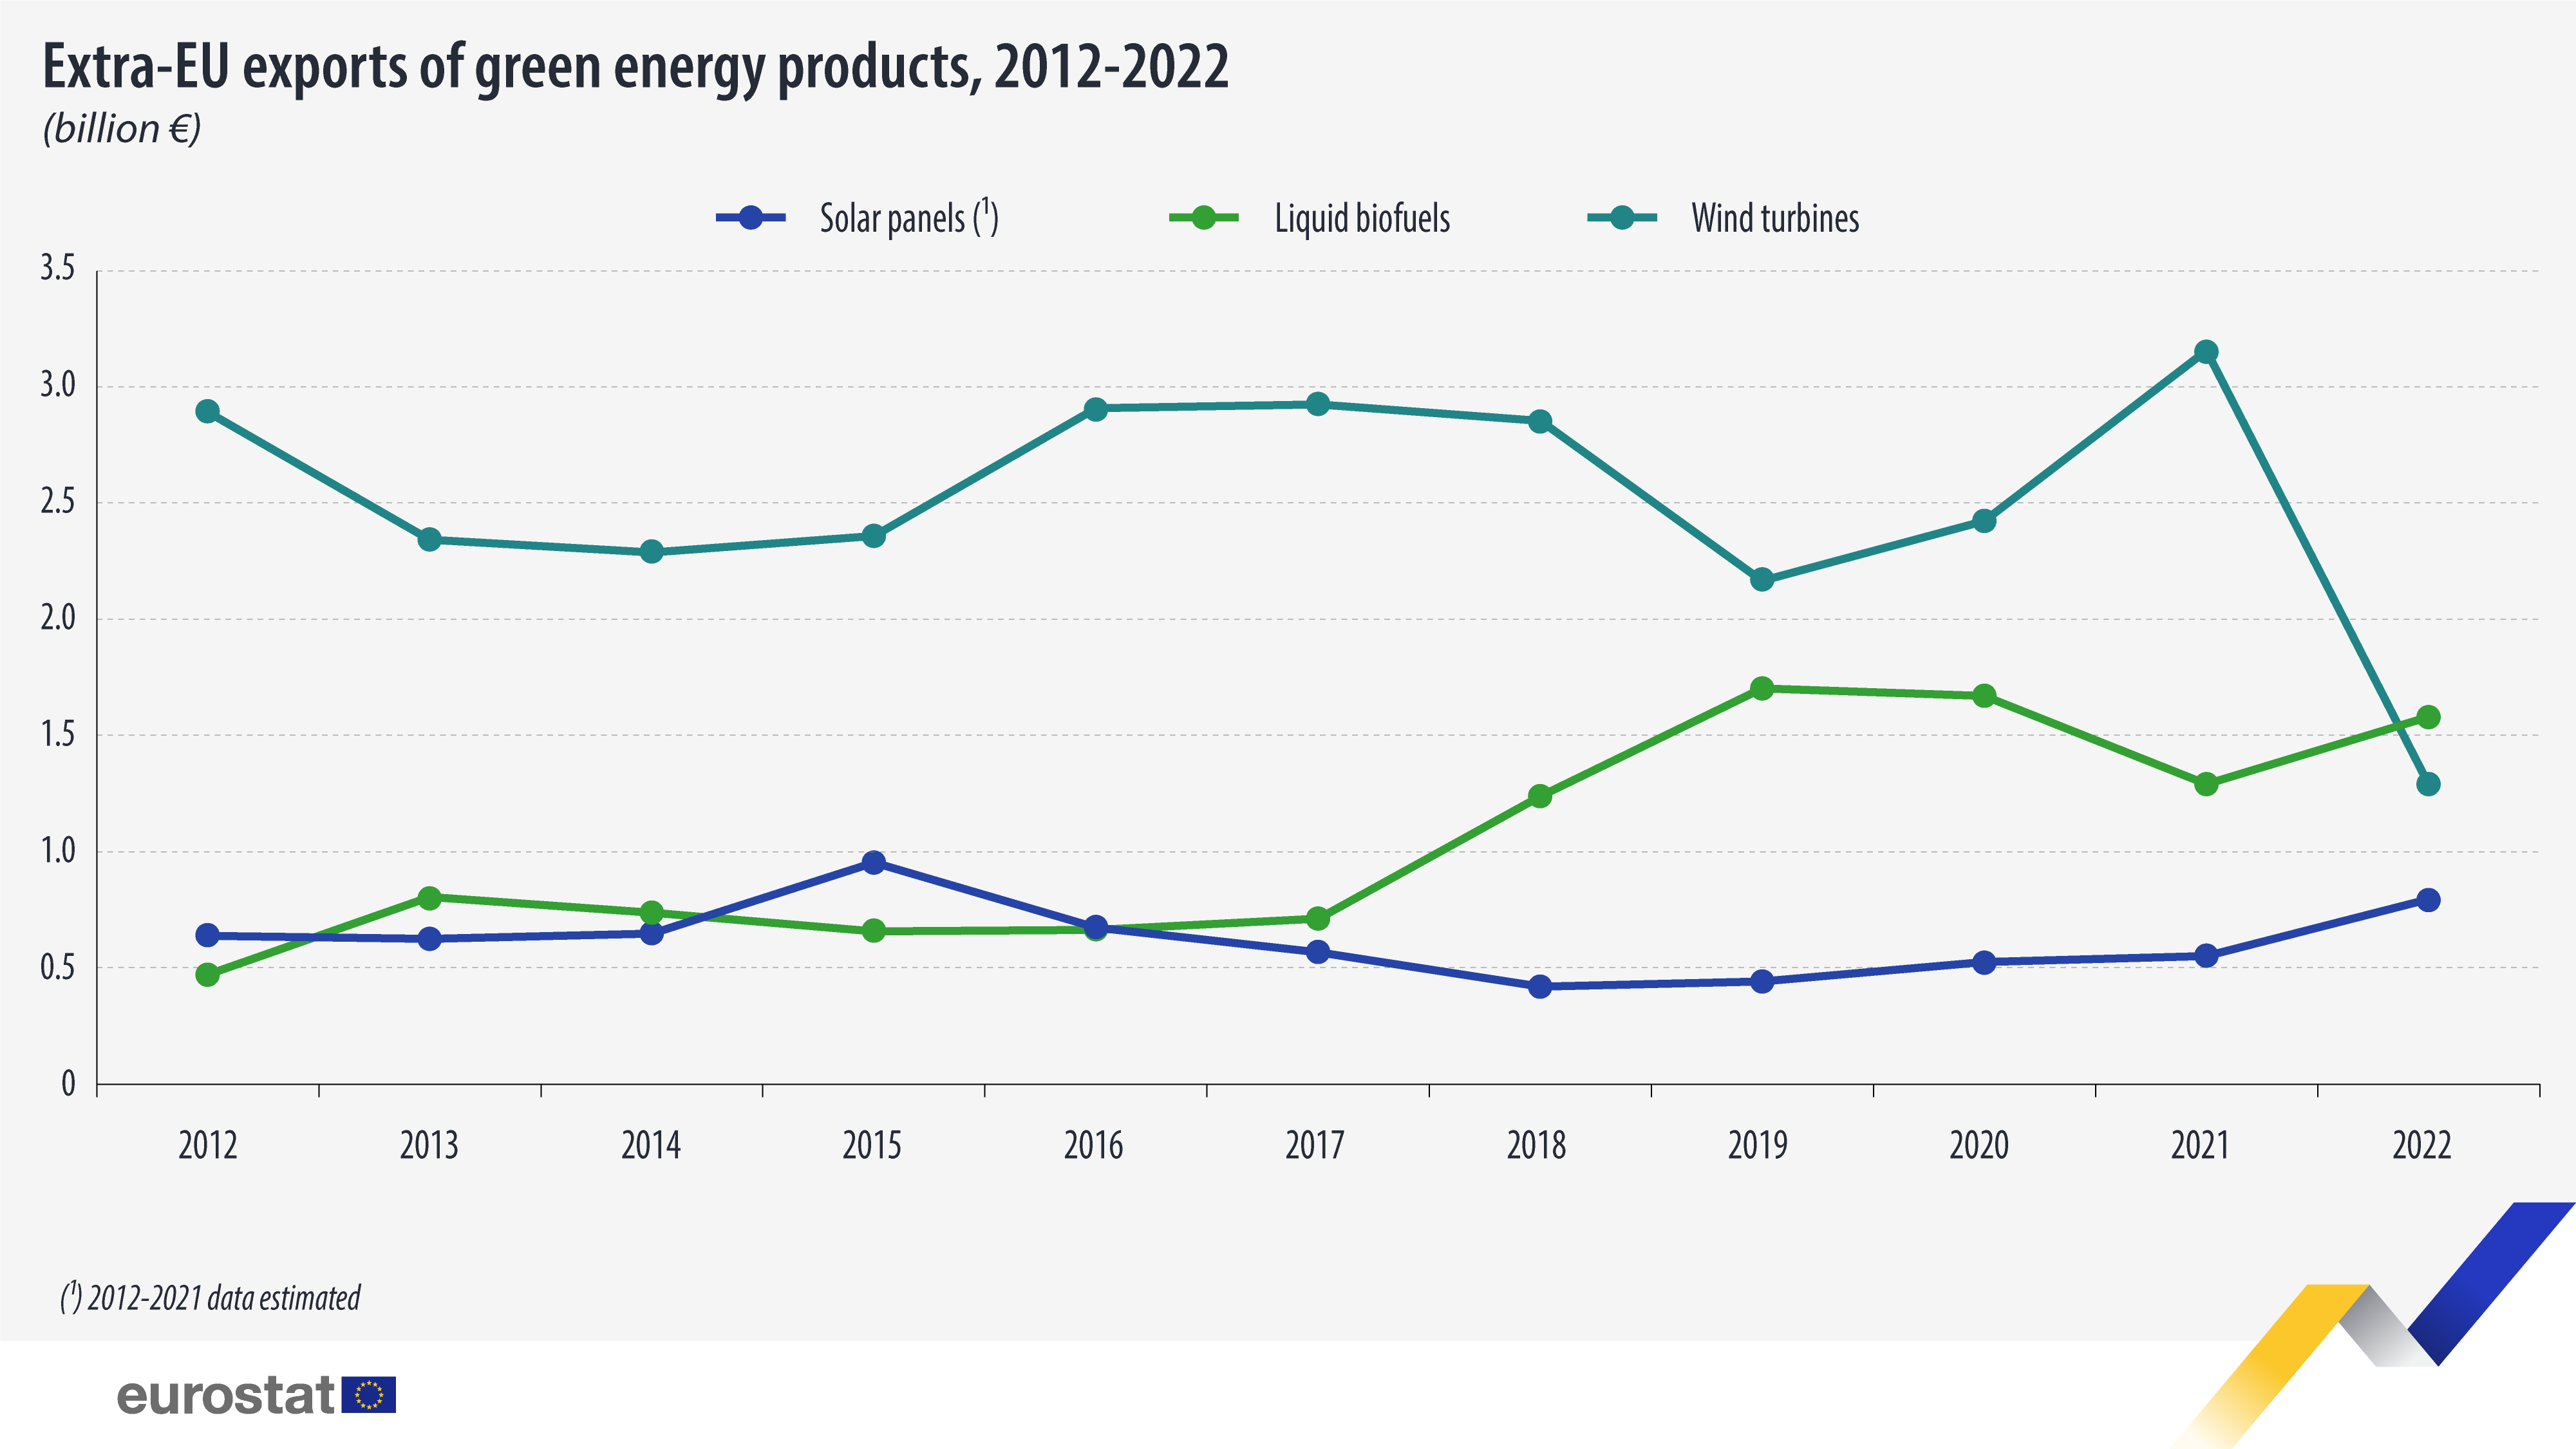 2022 showed significant rise in EU's imports of green energy products